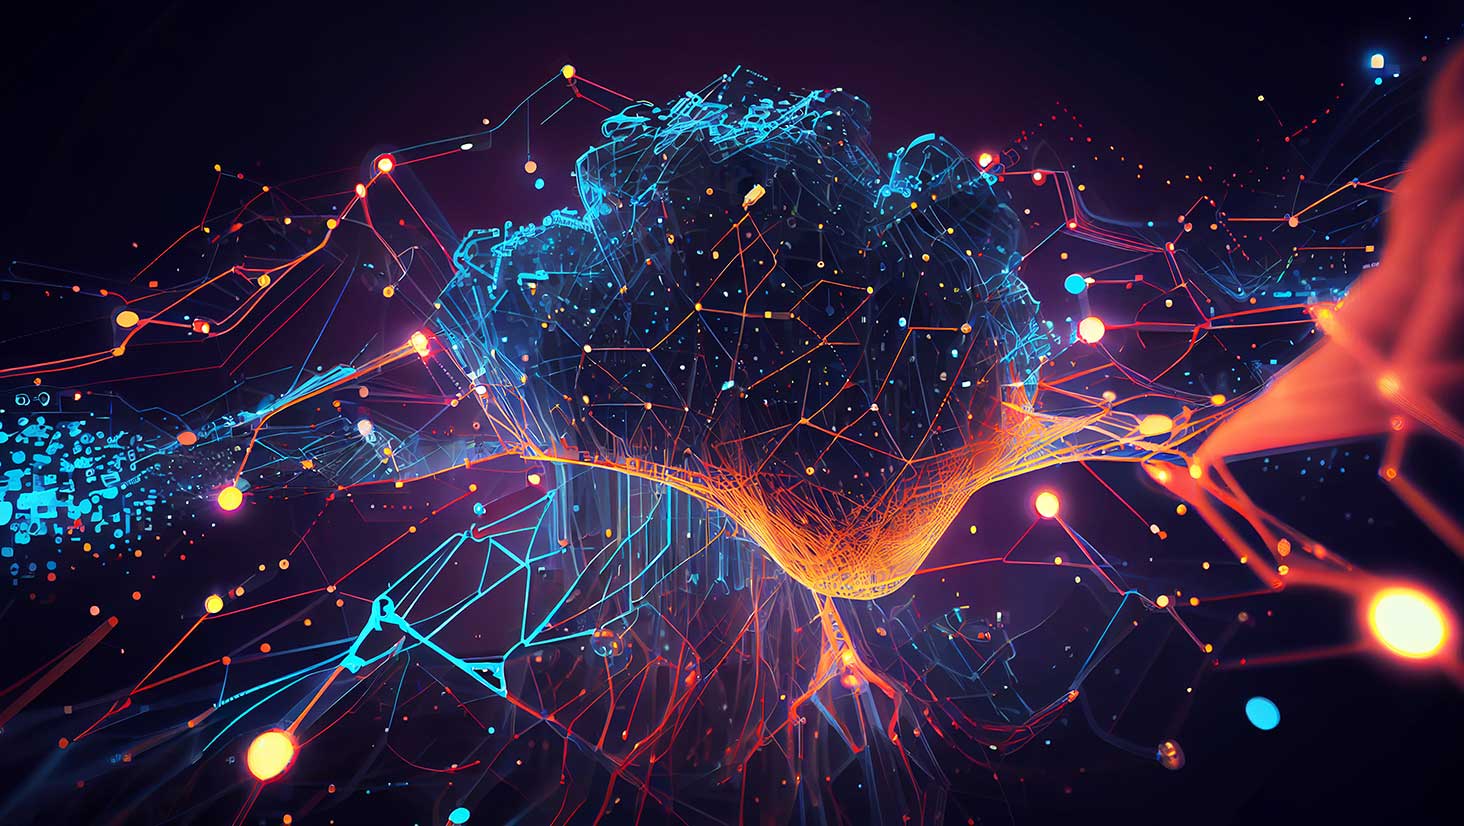 Abstract image of brain and computer imaging, questioning...is AI really revolutionary